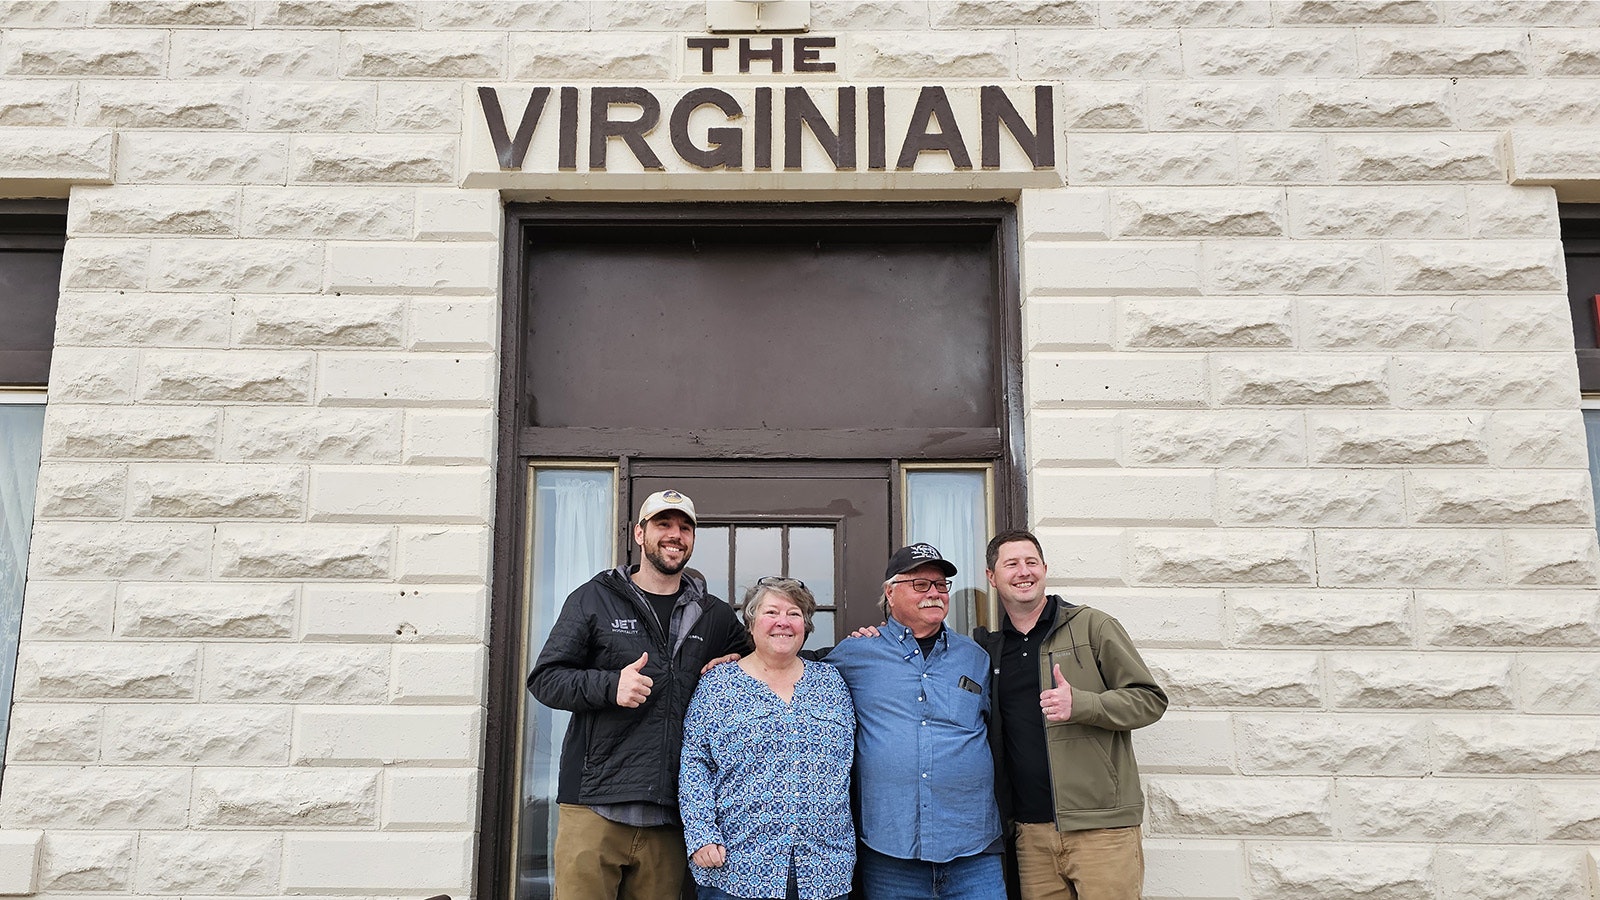 From left, new co-owner Jesse Baker, former owners Vickie and Vernon Scott, and co-owner Aaron Mumford pose for a photograph in front of The Virginian Hotel on Friday. The hotel changed ownership that day, closing out four generations of the Scott family's tenure at the hotel.